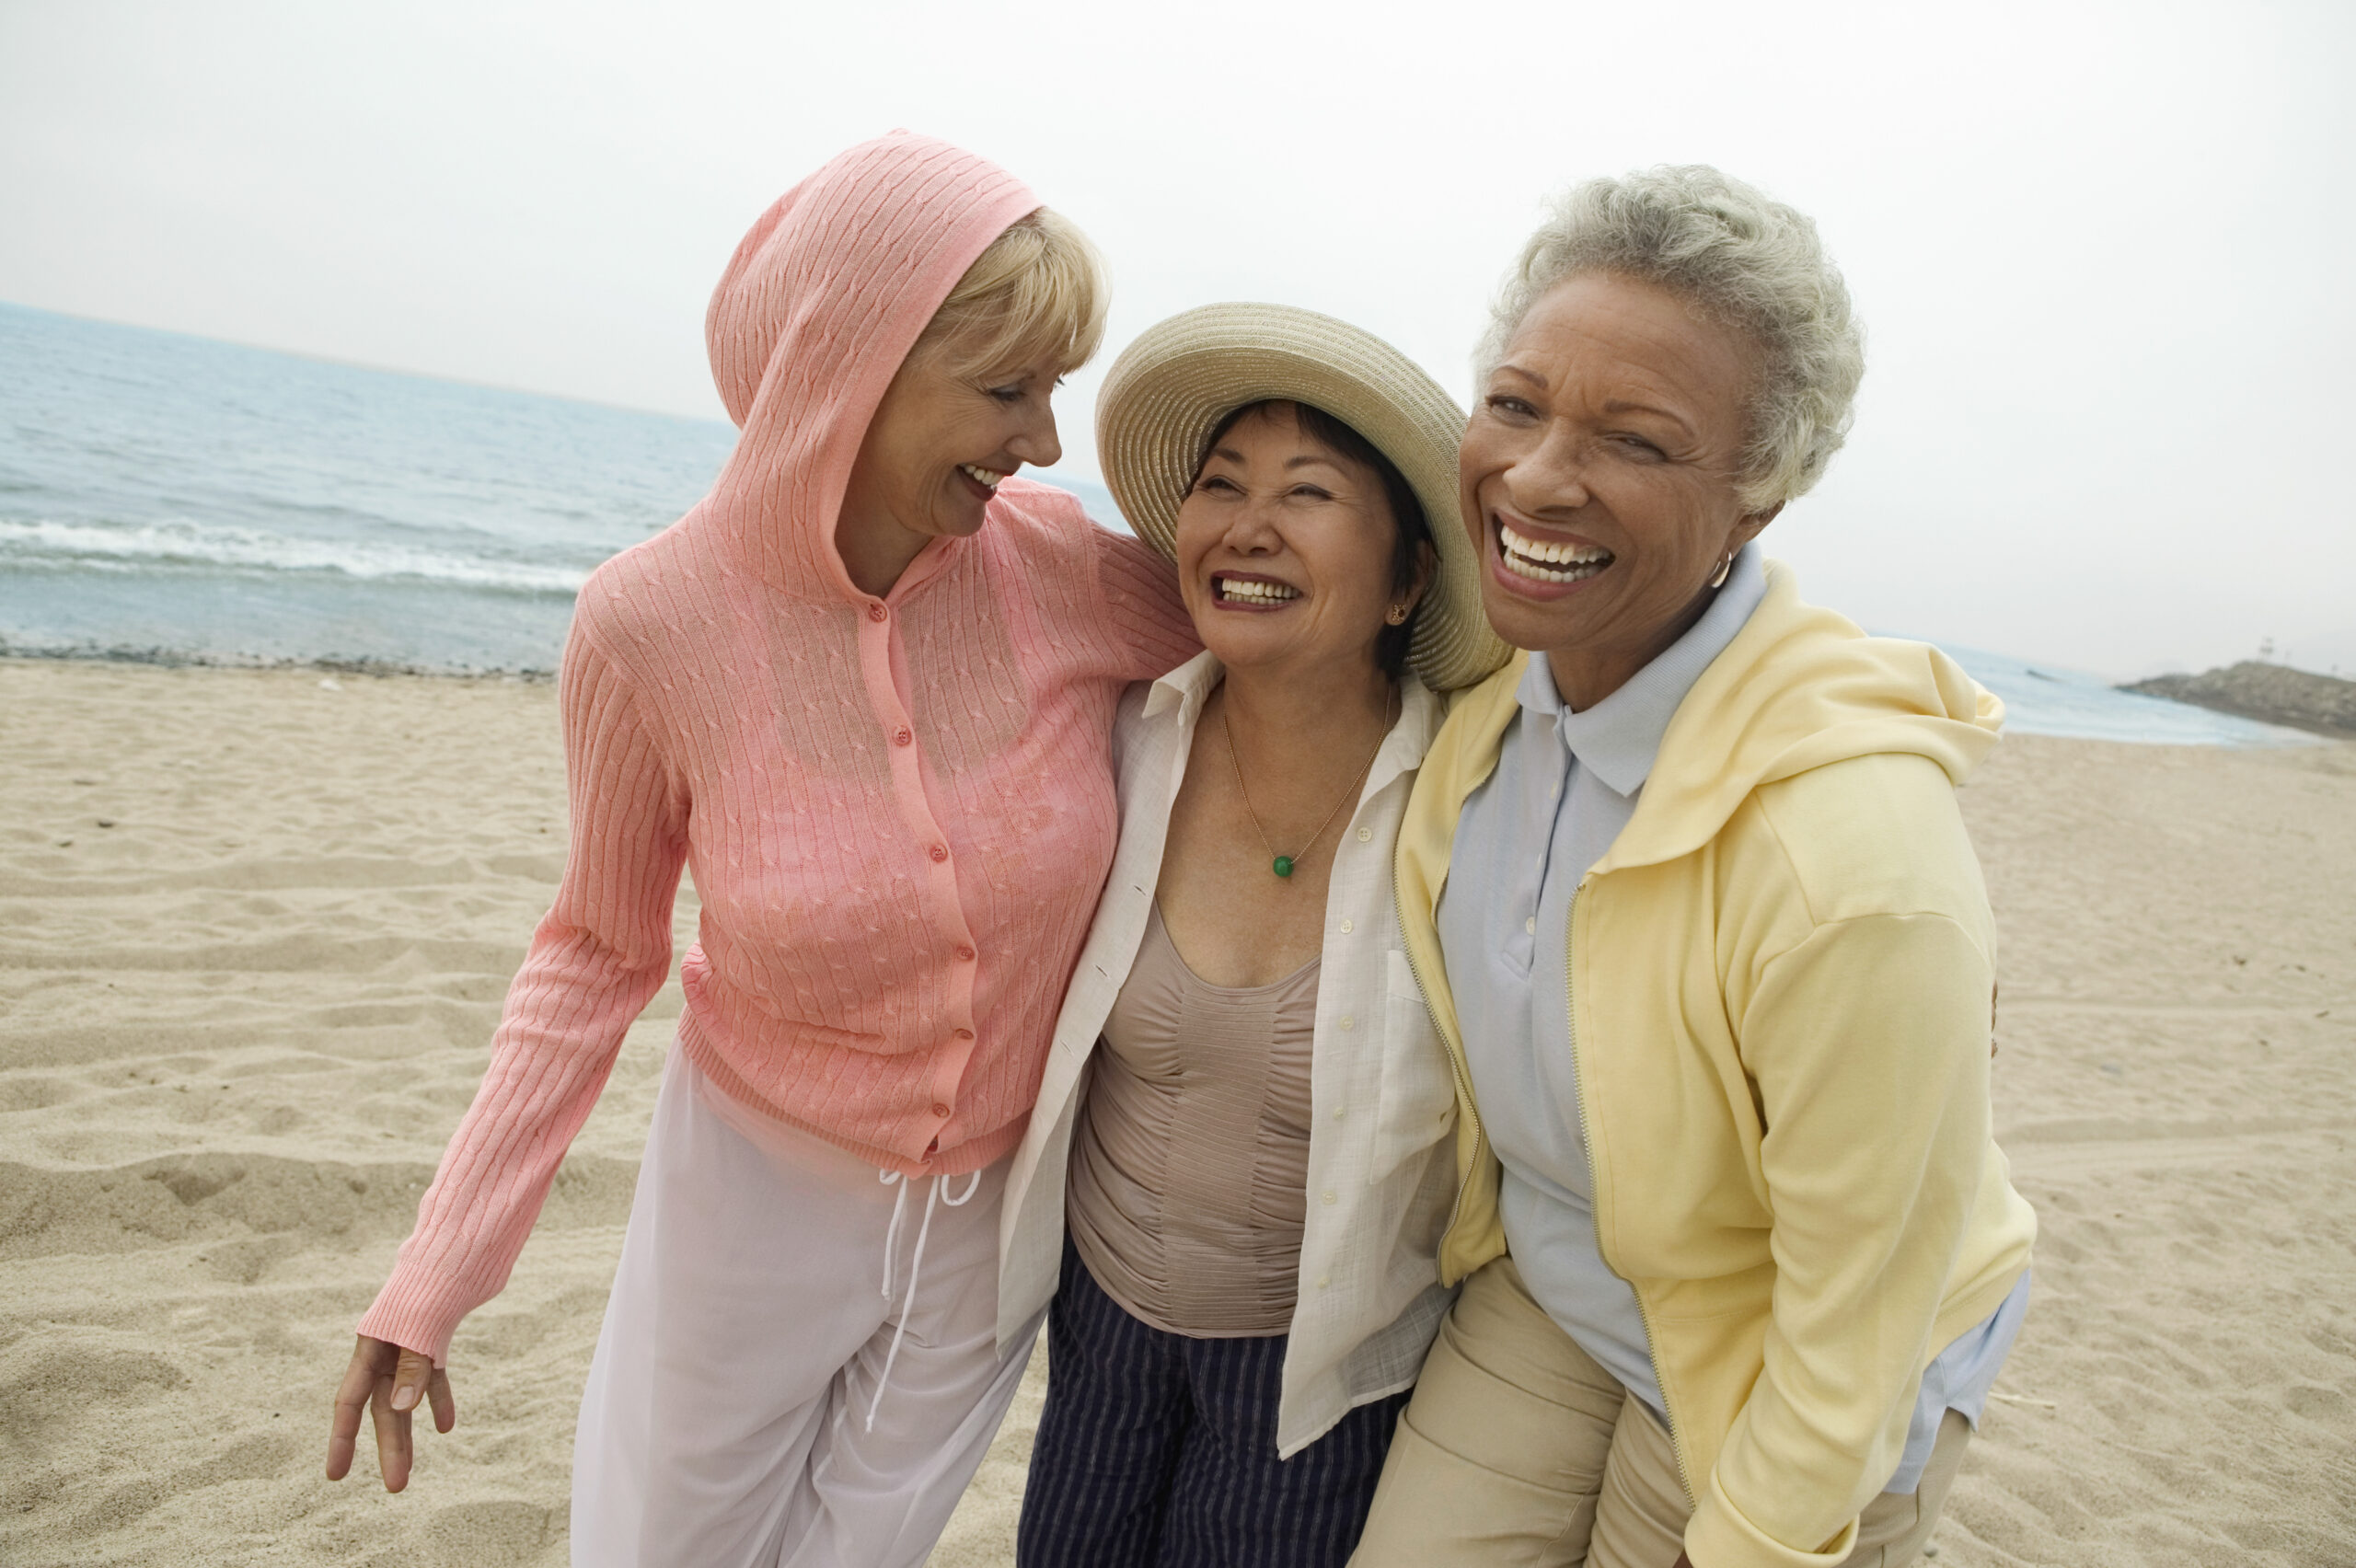 A longer life span and other factors can greatly affect women’s retirement readiness creating retirement hurdles for women.